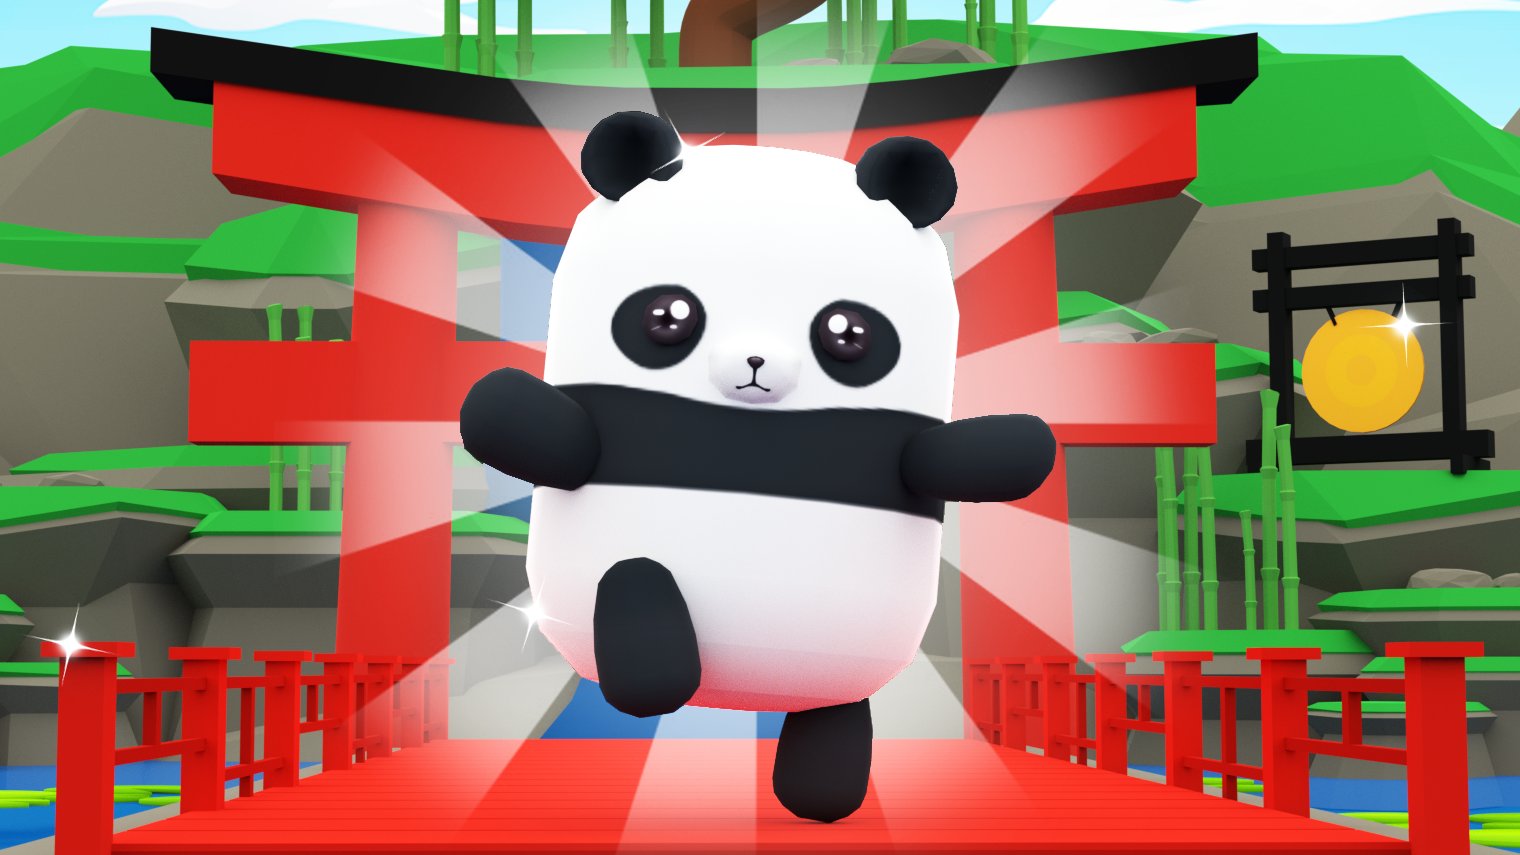 Ricky On Twitter He Is Cuddly He Is Giant He S A Kung Fu Expert He Is The Giant Panda Coming This Week To Pet Show Get Ready To Be One With Peace And Nature In The - meh panda roblox